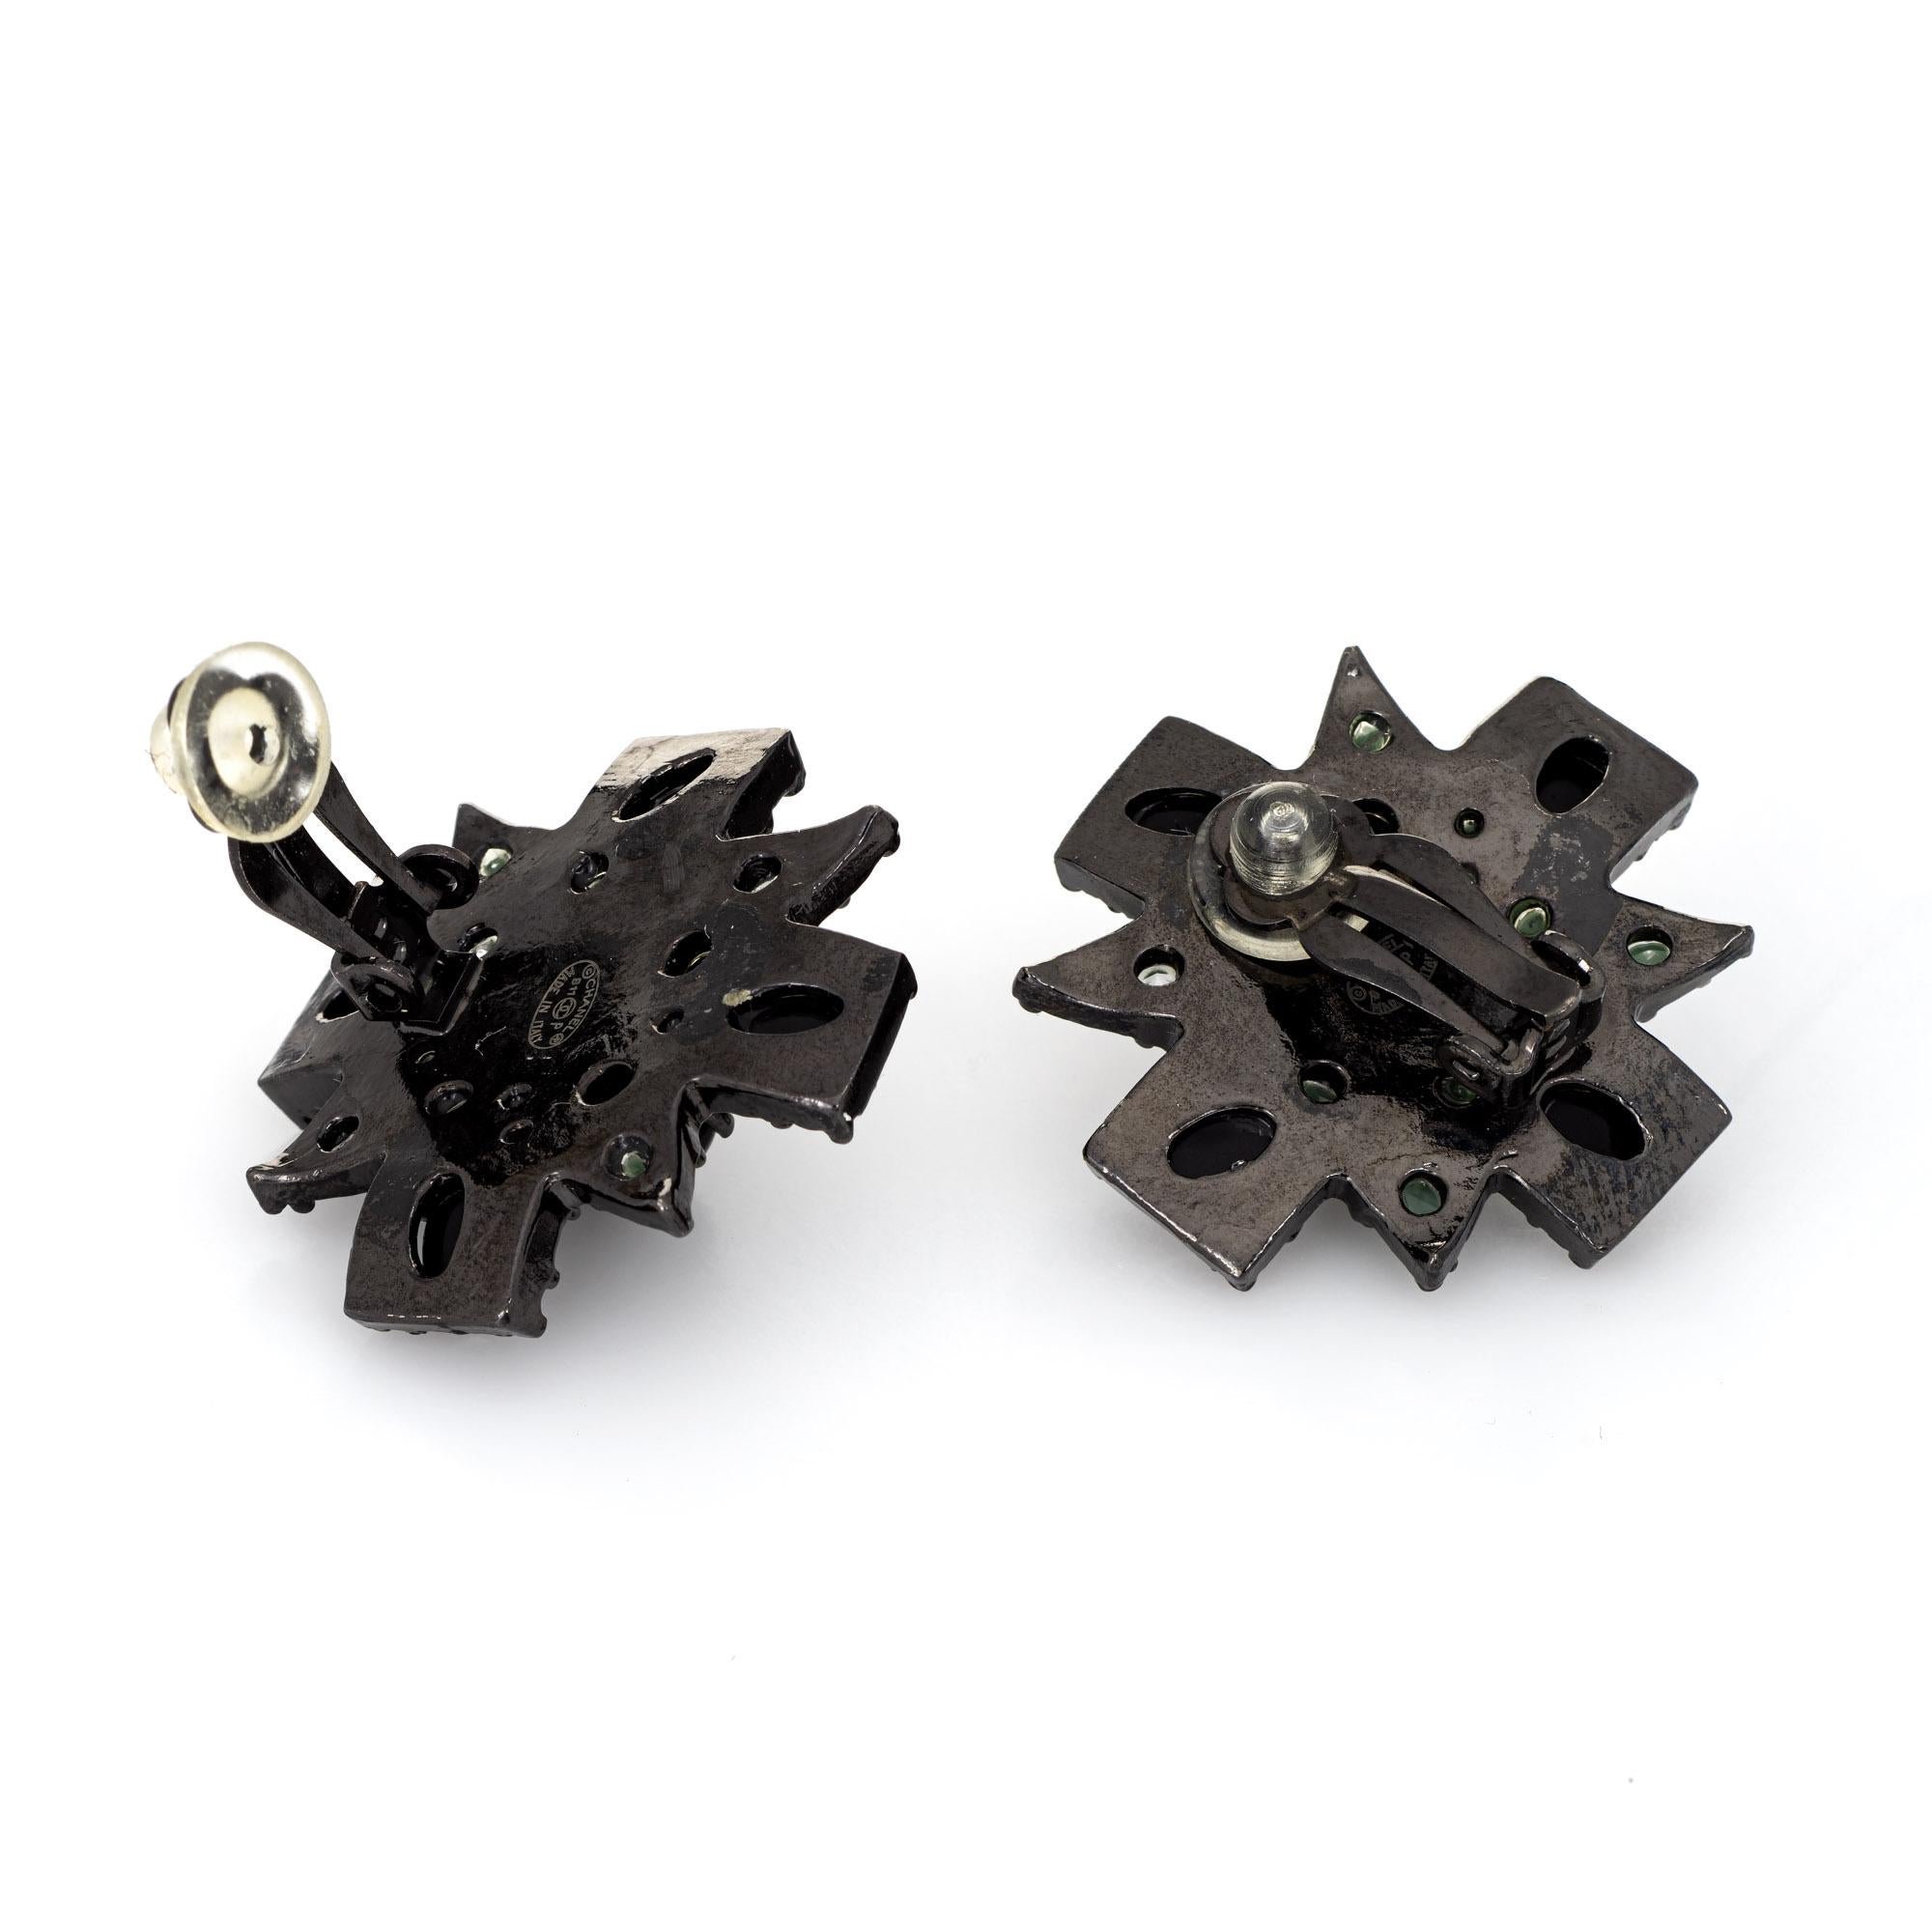 Pre-owned Chanel large black cross earrings (circa 2011).

The earrings feature the CC logo set upon the large black enameled cross earrings. The earrings are fitted with clip on backings for non-pierced or pierced ears. The earrings date to the